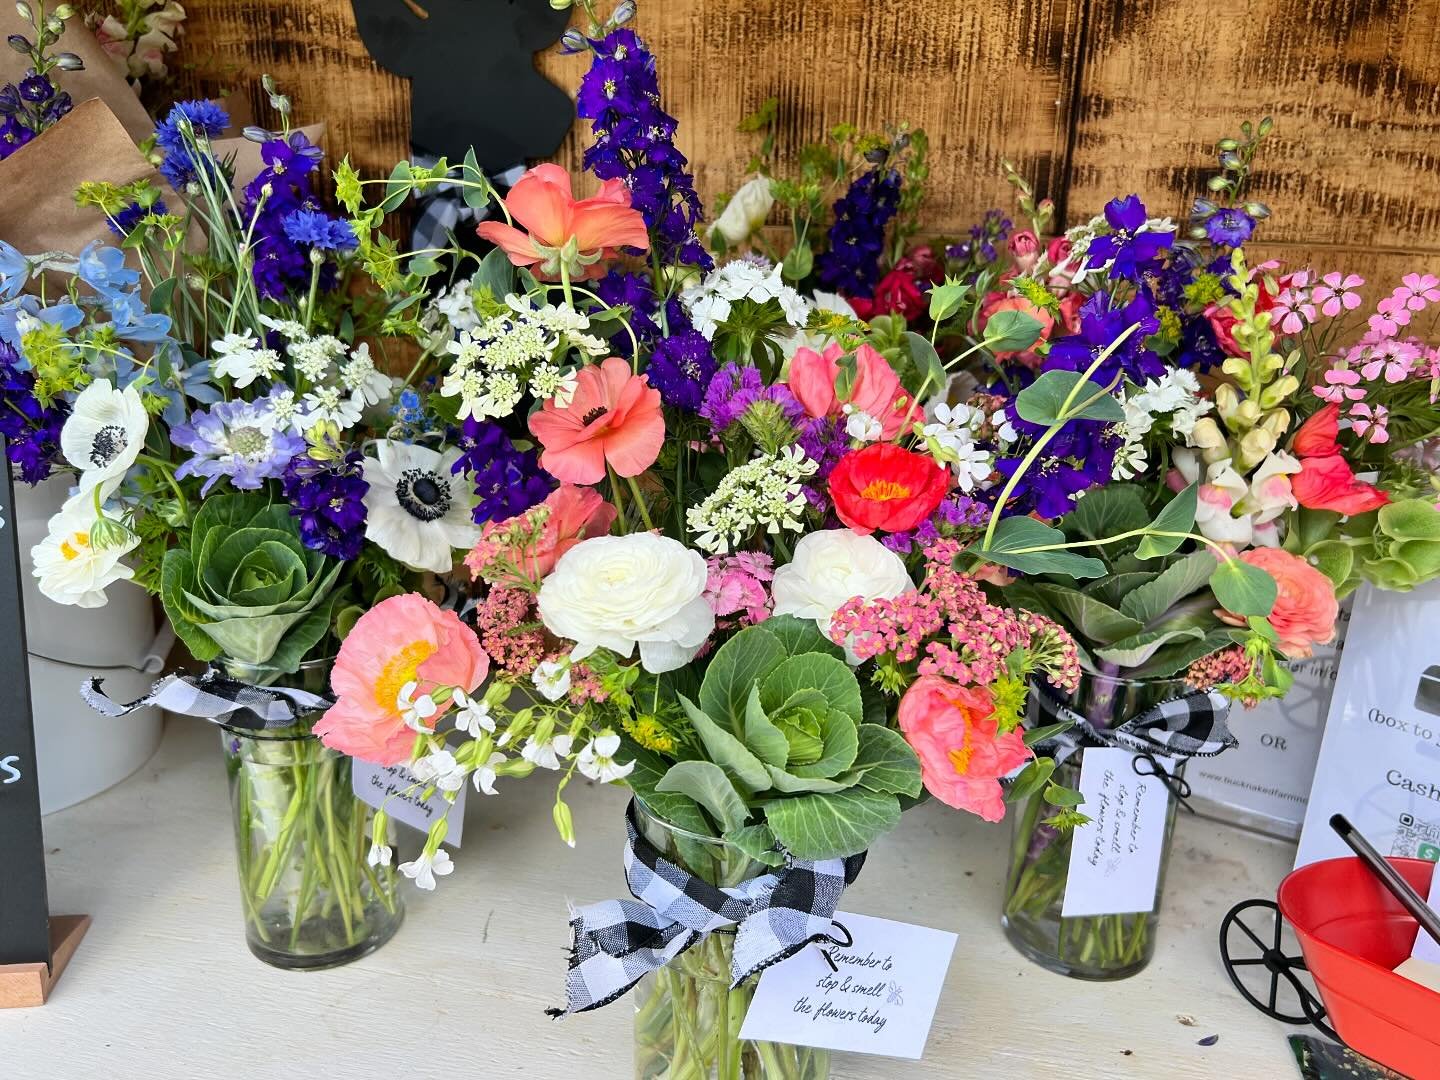 Bouquets while they last at the farmstand today. Stop by and take a photo to share with Mom!